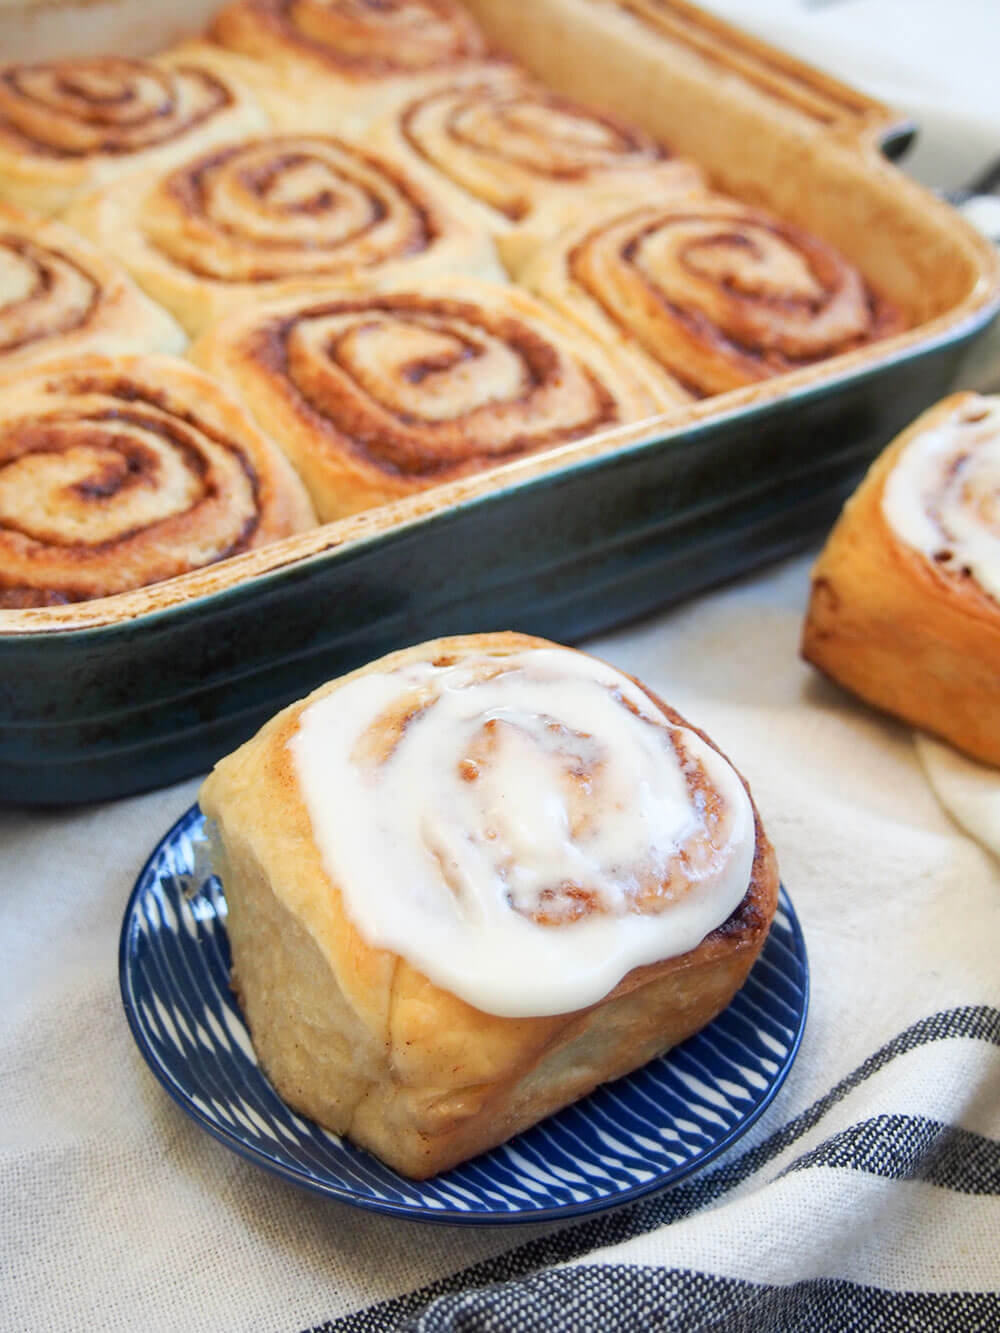 eggnog cinnamon roll with frosting sitting on small plate in front of dish with more rolls